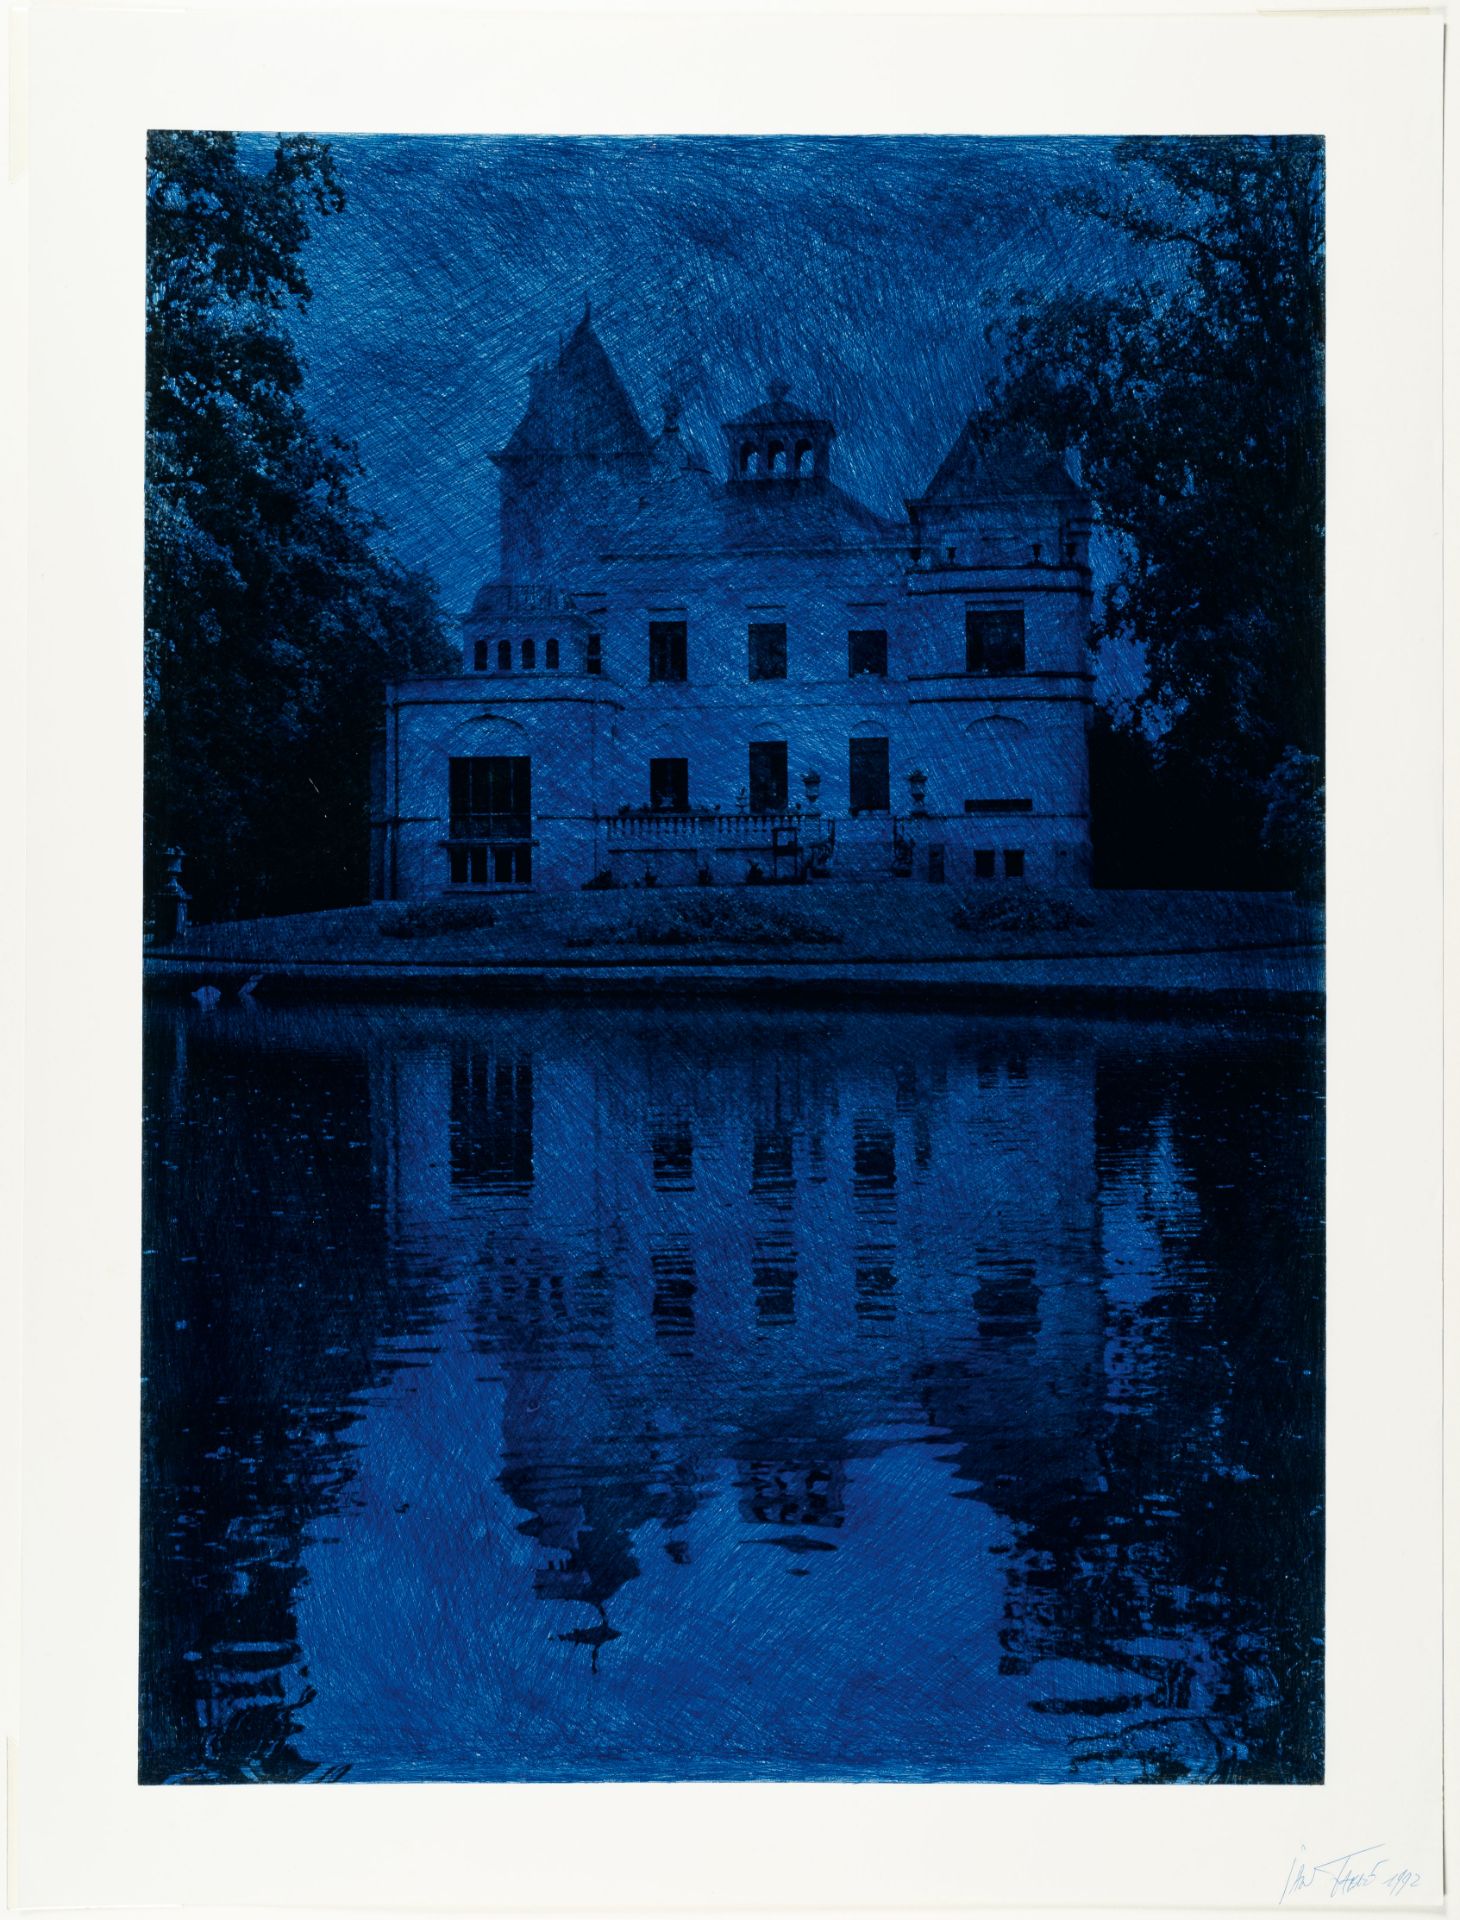 Jan Fabre, Tivoli palace.C-print on photo paper, drawn over with ballpoint pen. 1992. Ca. 70 x 50 cm - Image 2 of 3